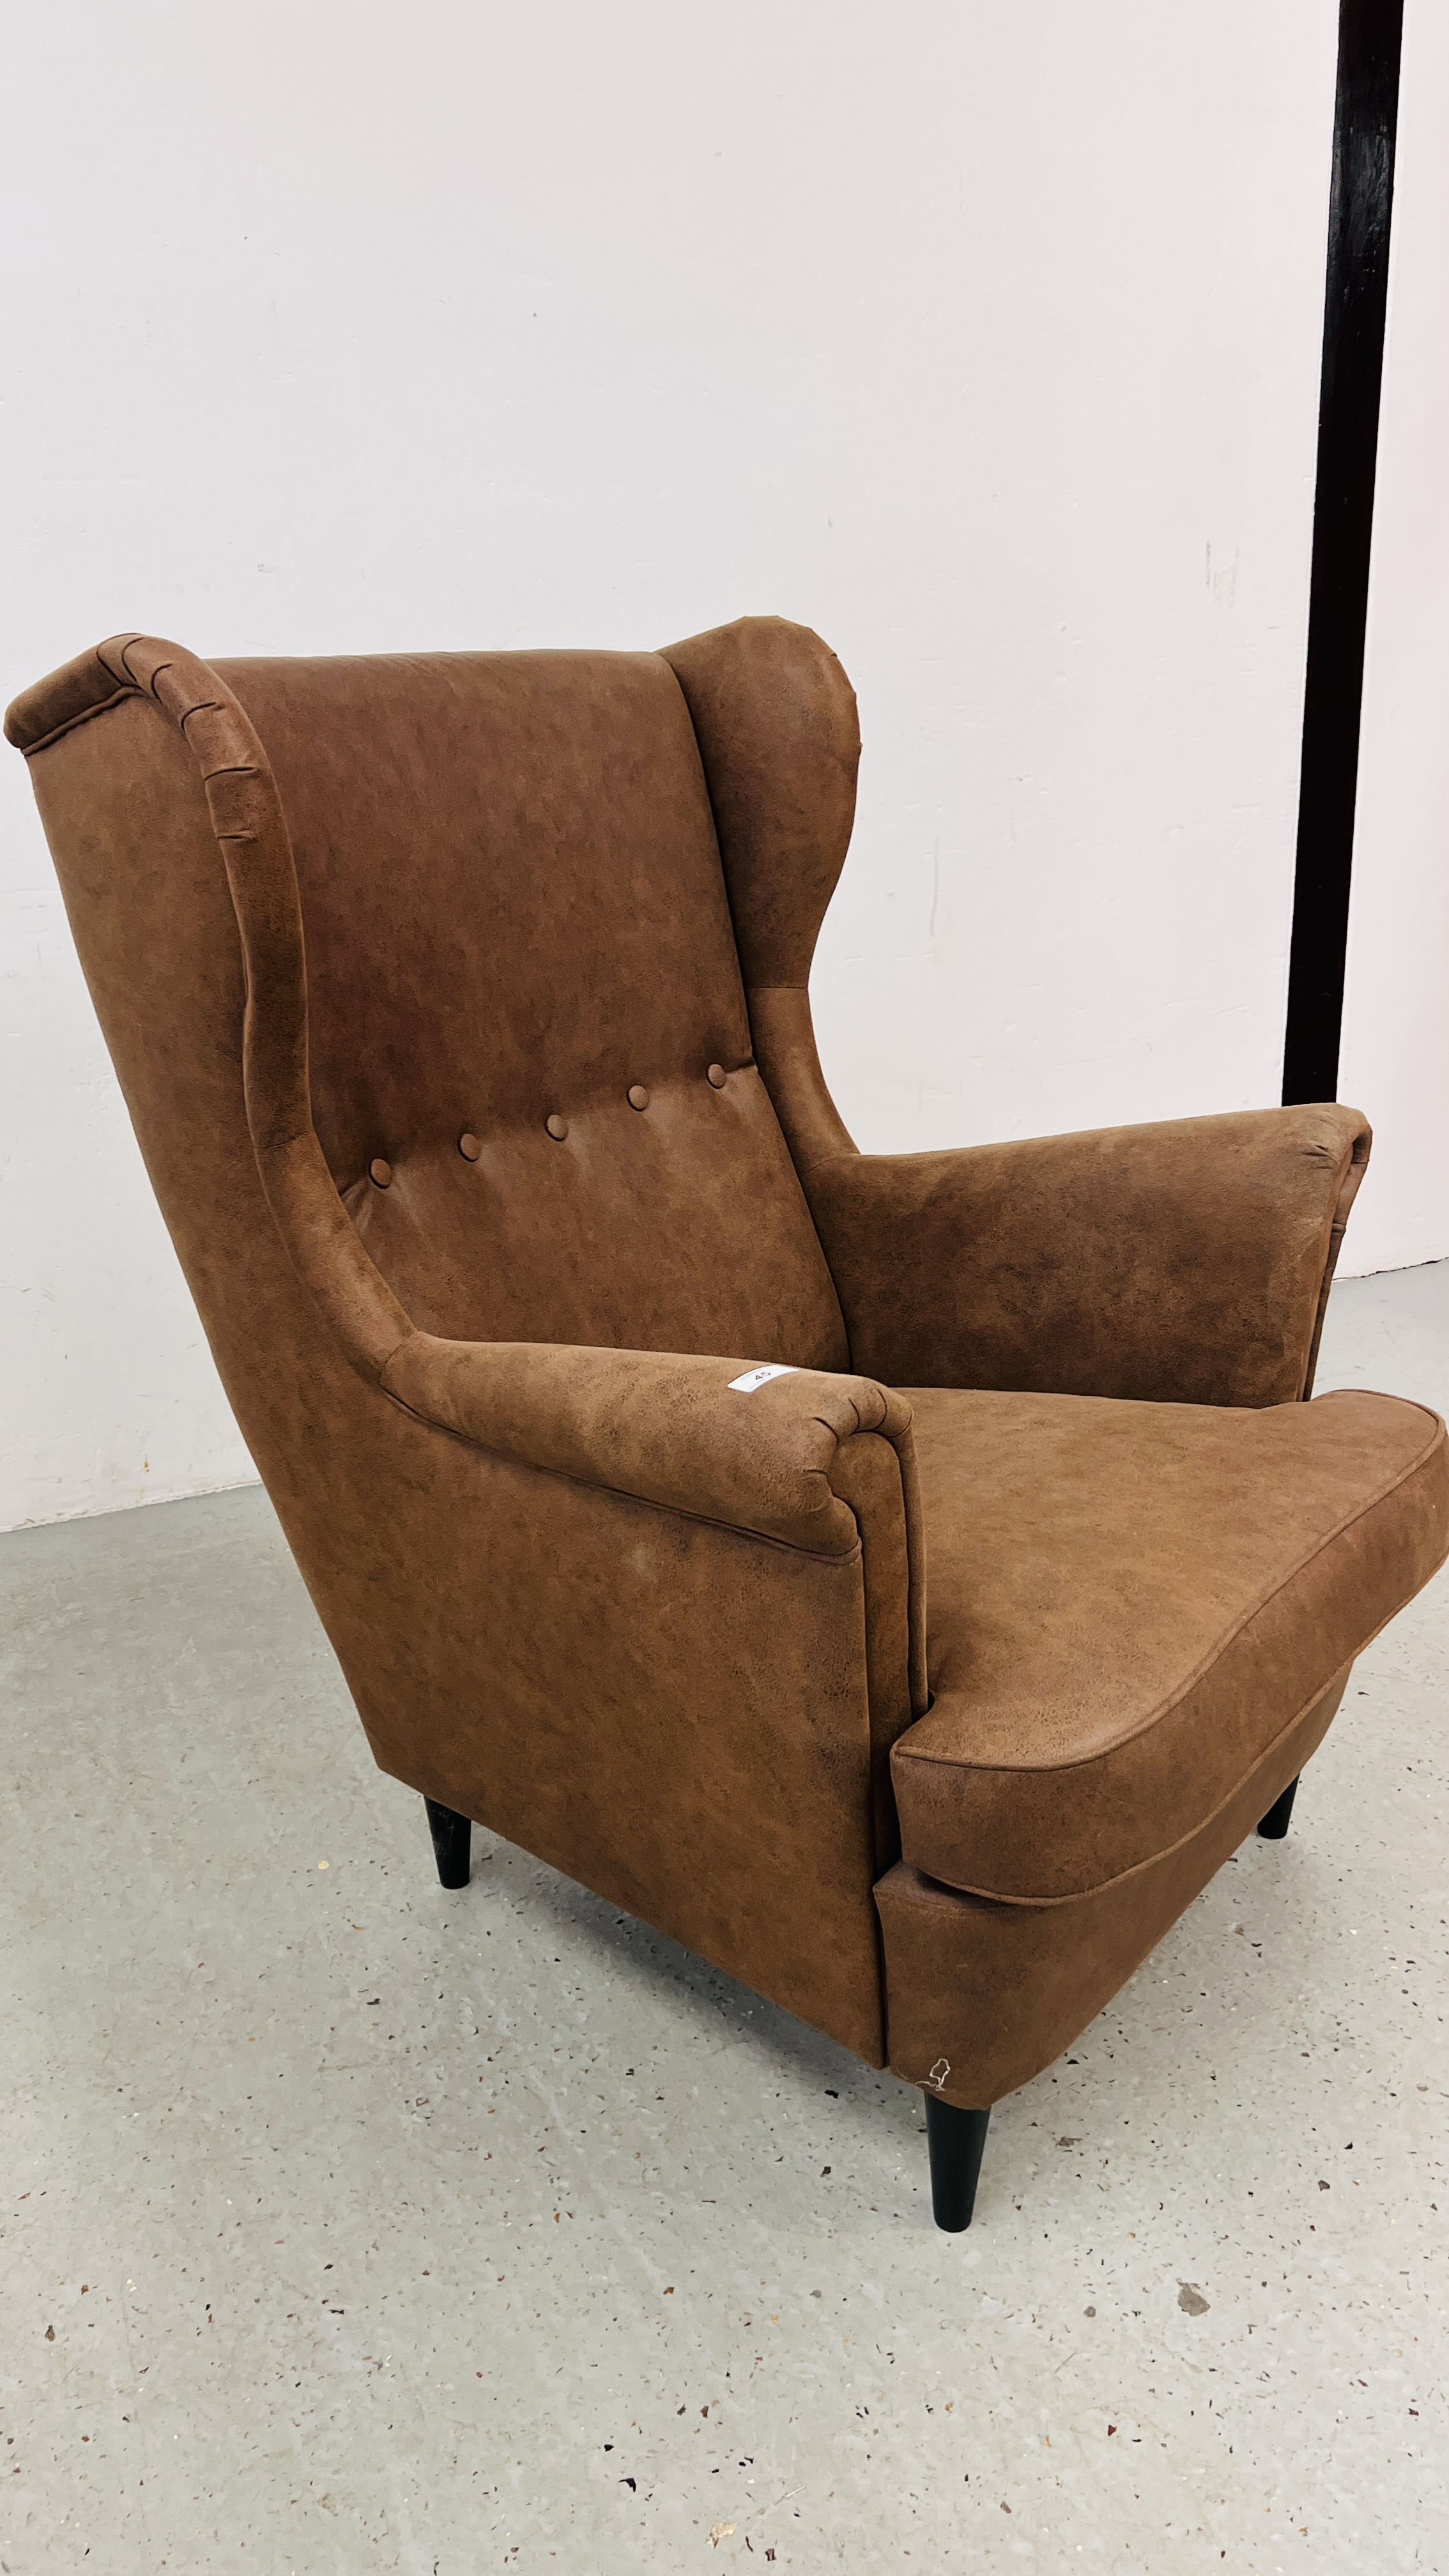 A MODEERN IKEA DESIGNER WINGED ARM CHAIR FAUX BROWN SUEDE UPHOLSTERTY - Image 6 of 7